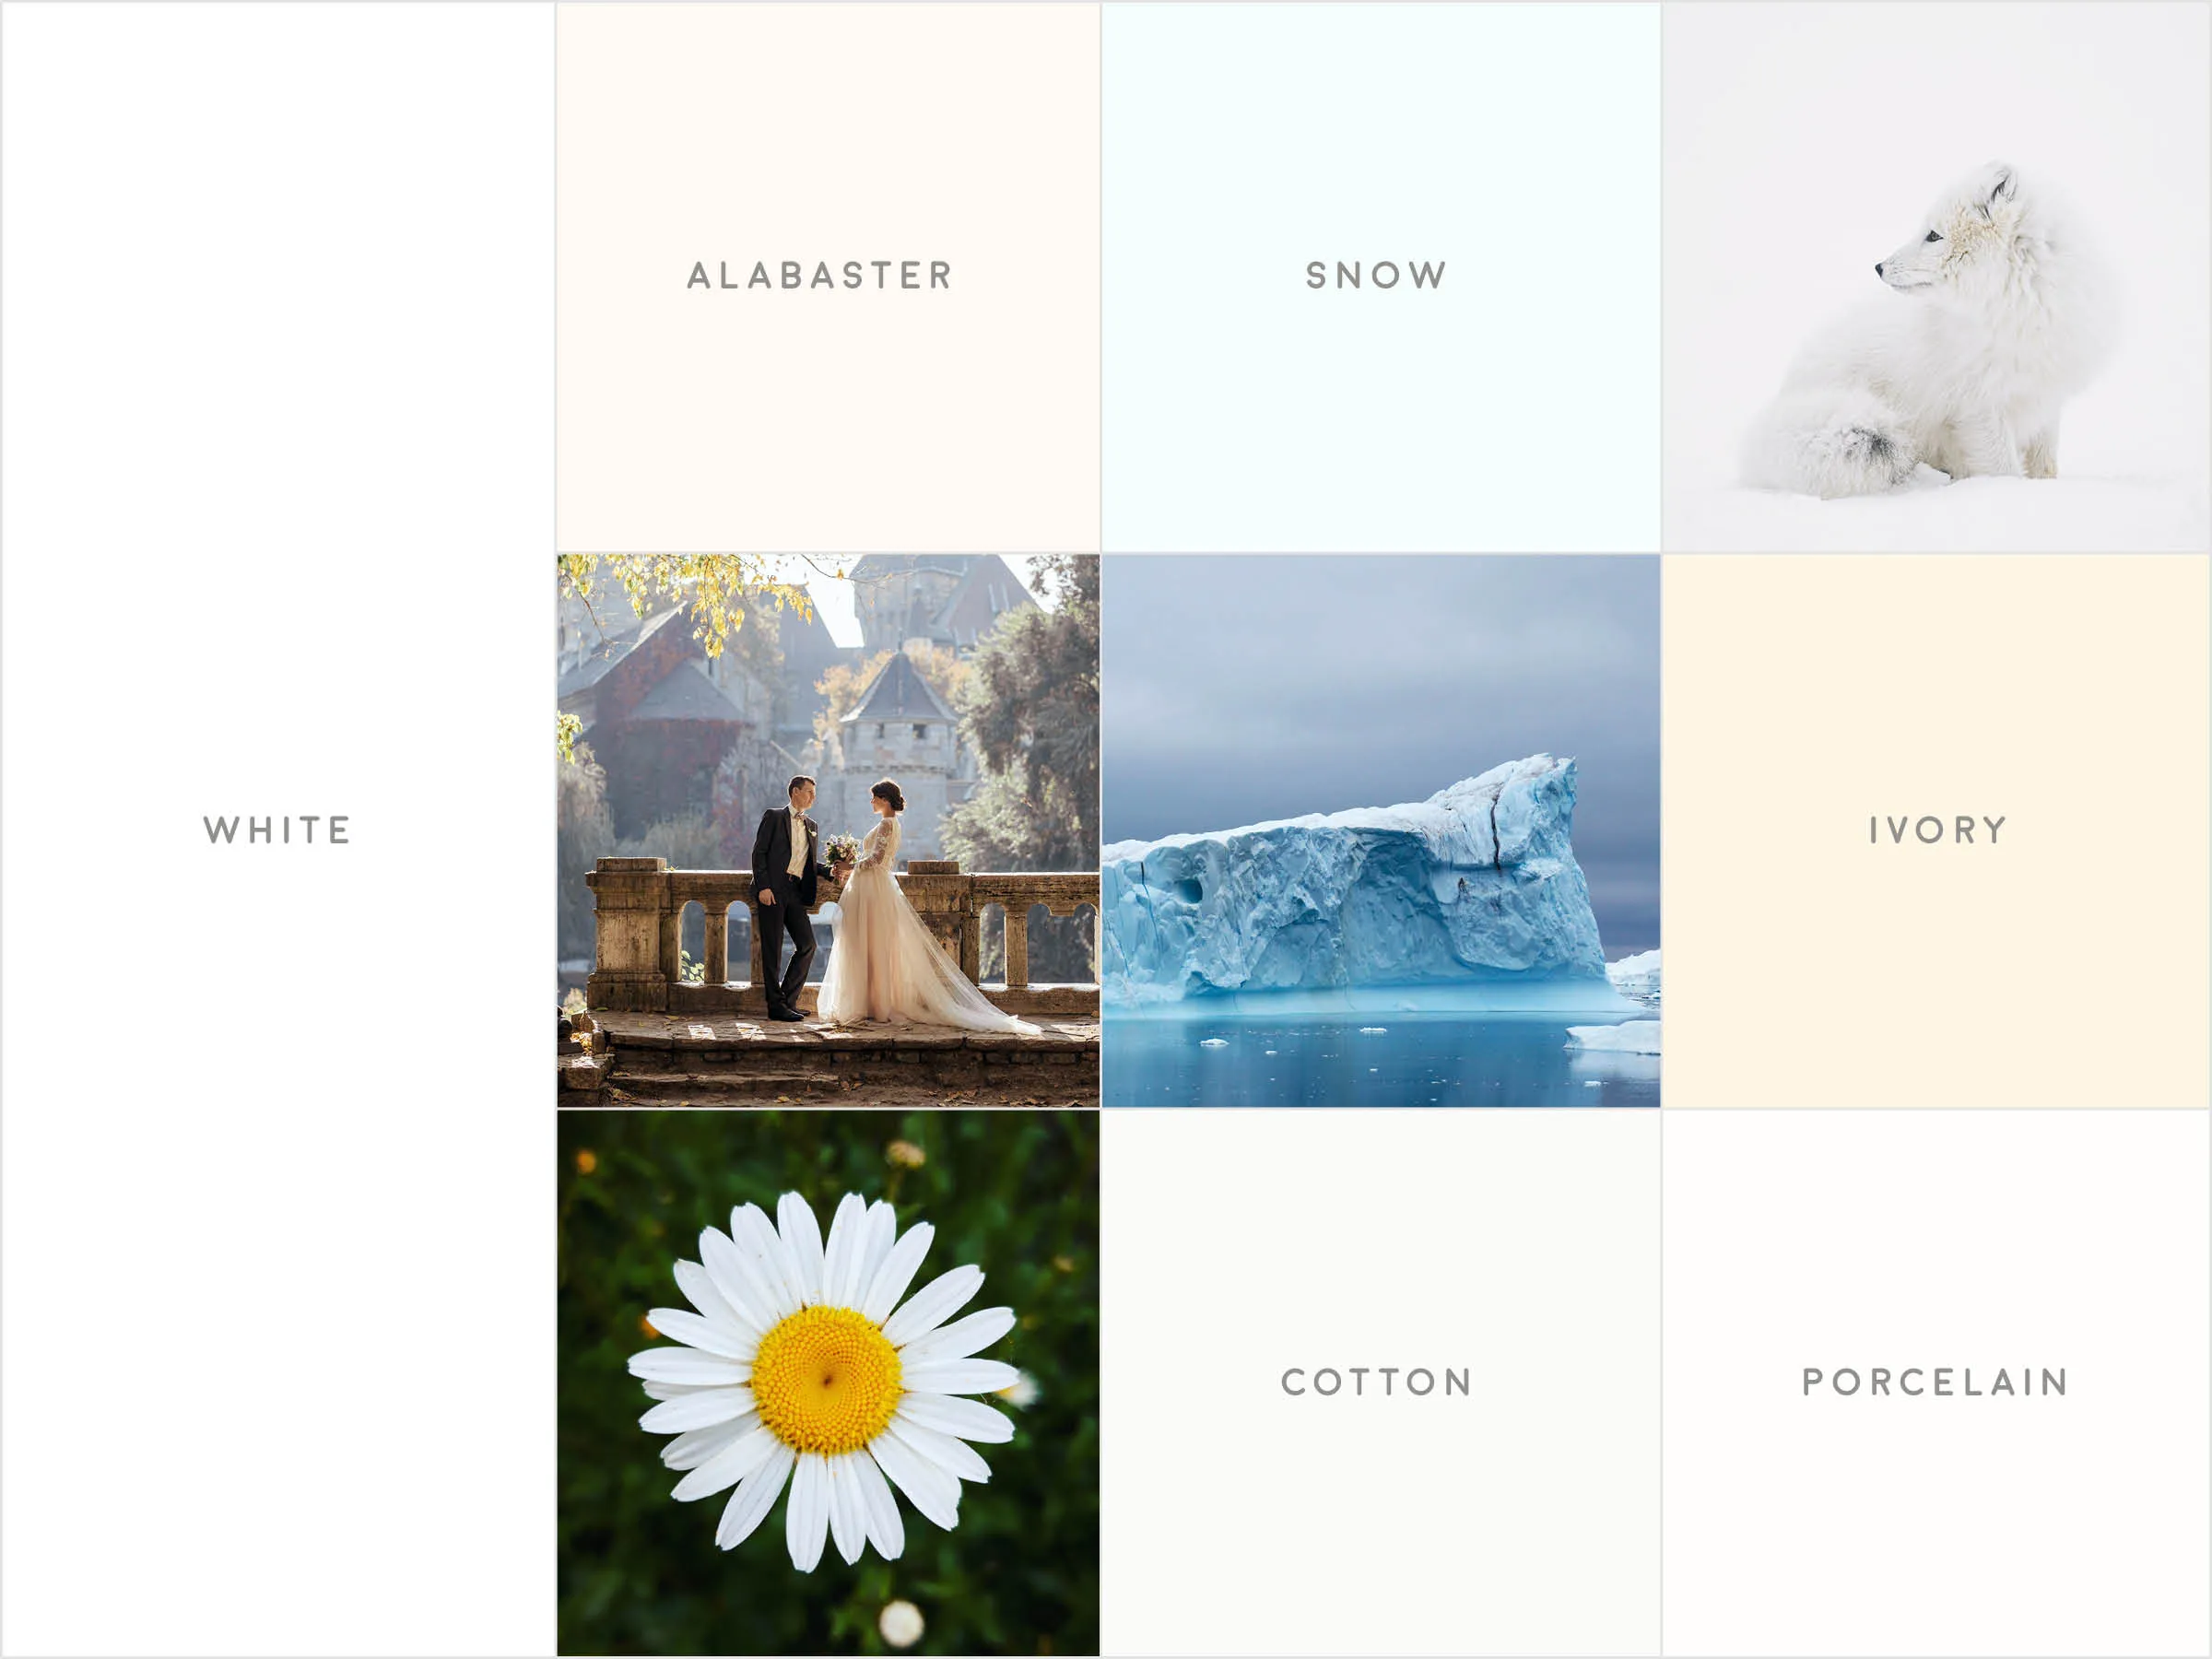 A gridded image with various tones of white, with small photographs of a glacier, a wedding, a flower, and an arctic fox